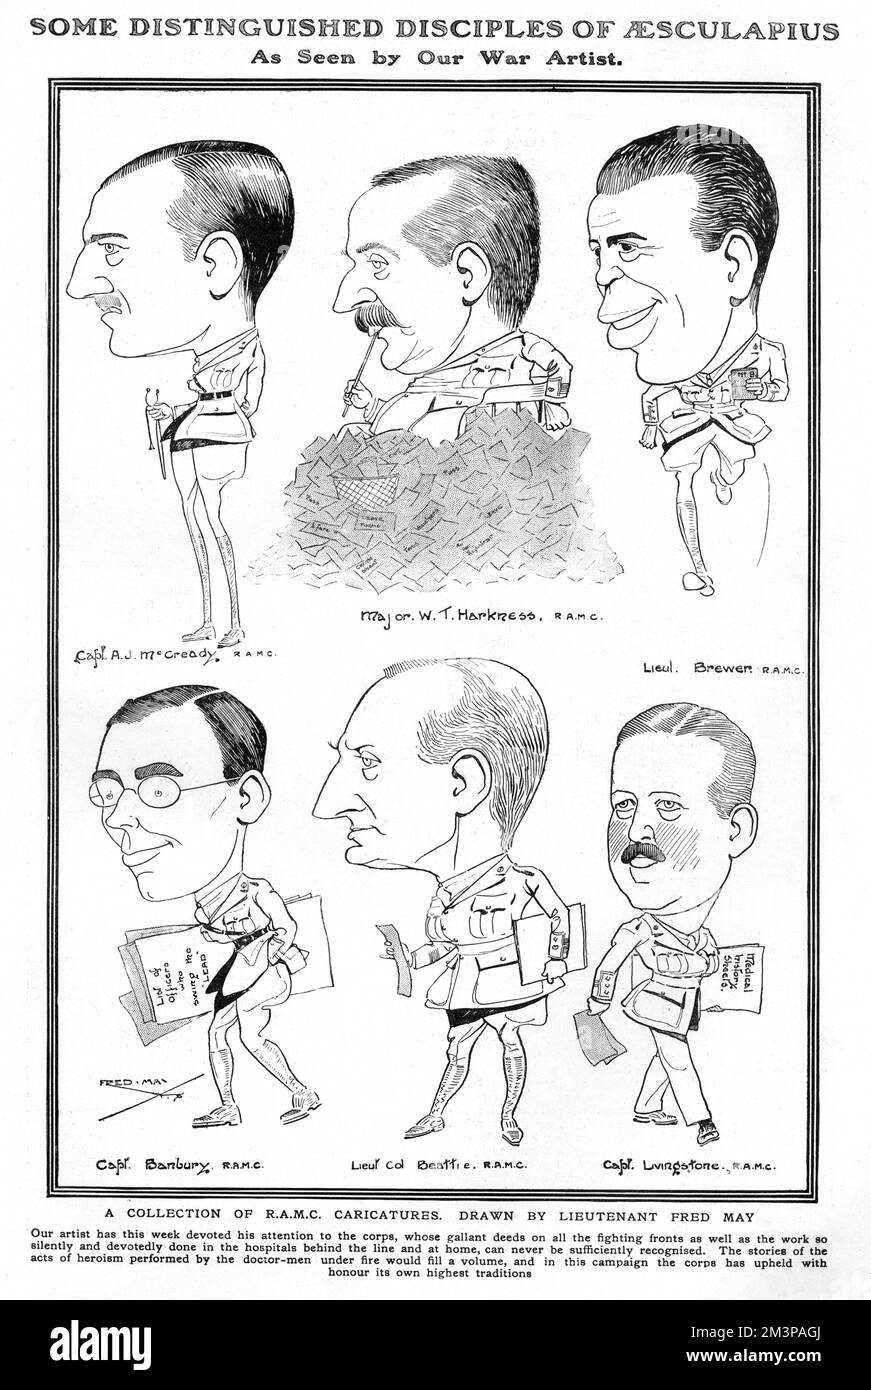 Portraits of members of the RAMC by caricaturist Fred May.  Clockwise from top left - Captain A. J. McCready, Major W. T. Harkness, Lieutenant Brewen, Captain Banbury, Lieut-Colonel Beattie and Captain Livingstone.       Date: 1918 Stock Photo